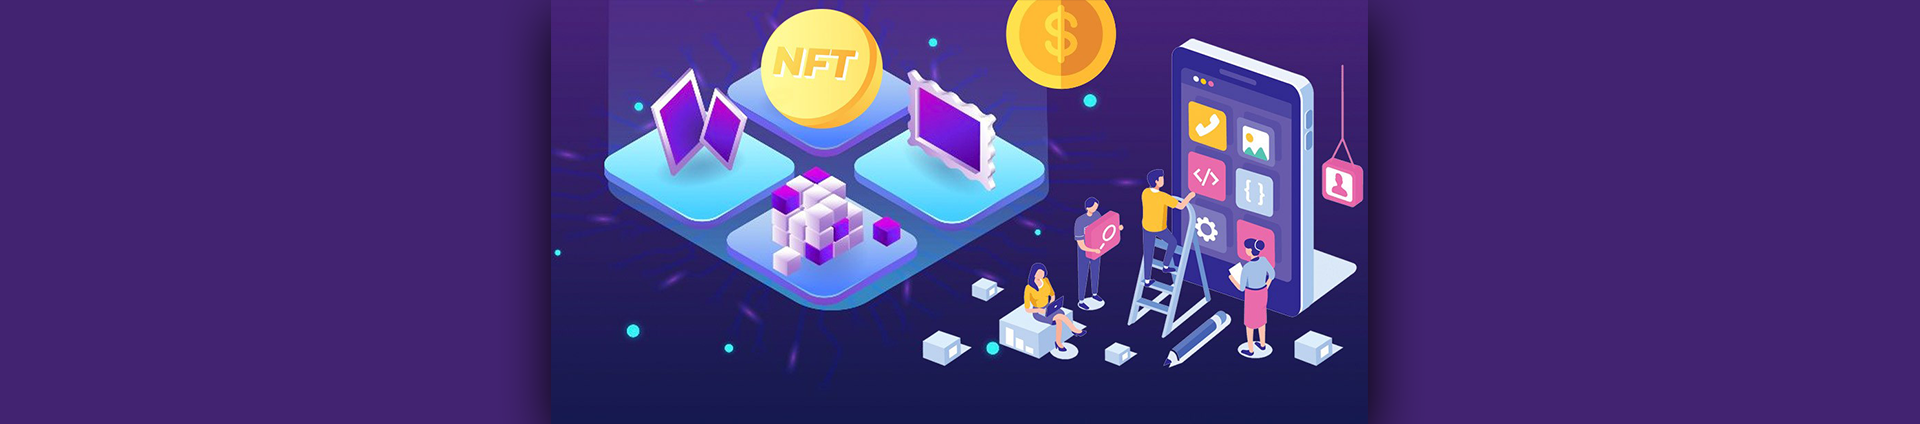 NFT Development: Challenges and Opportunities